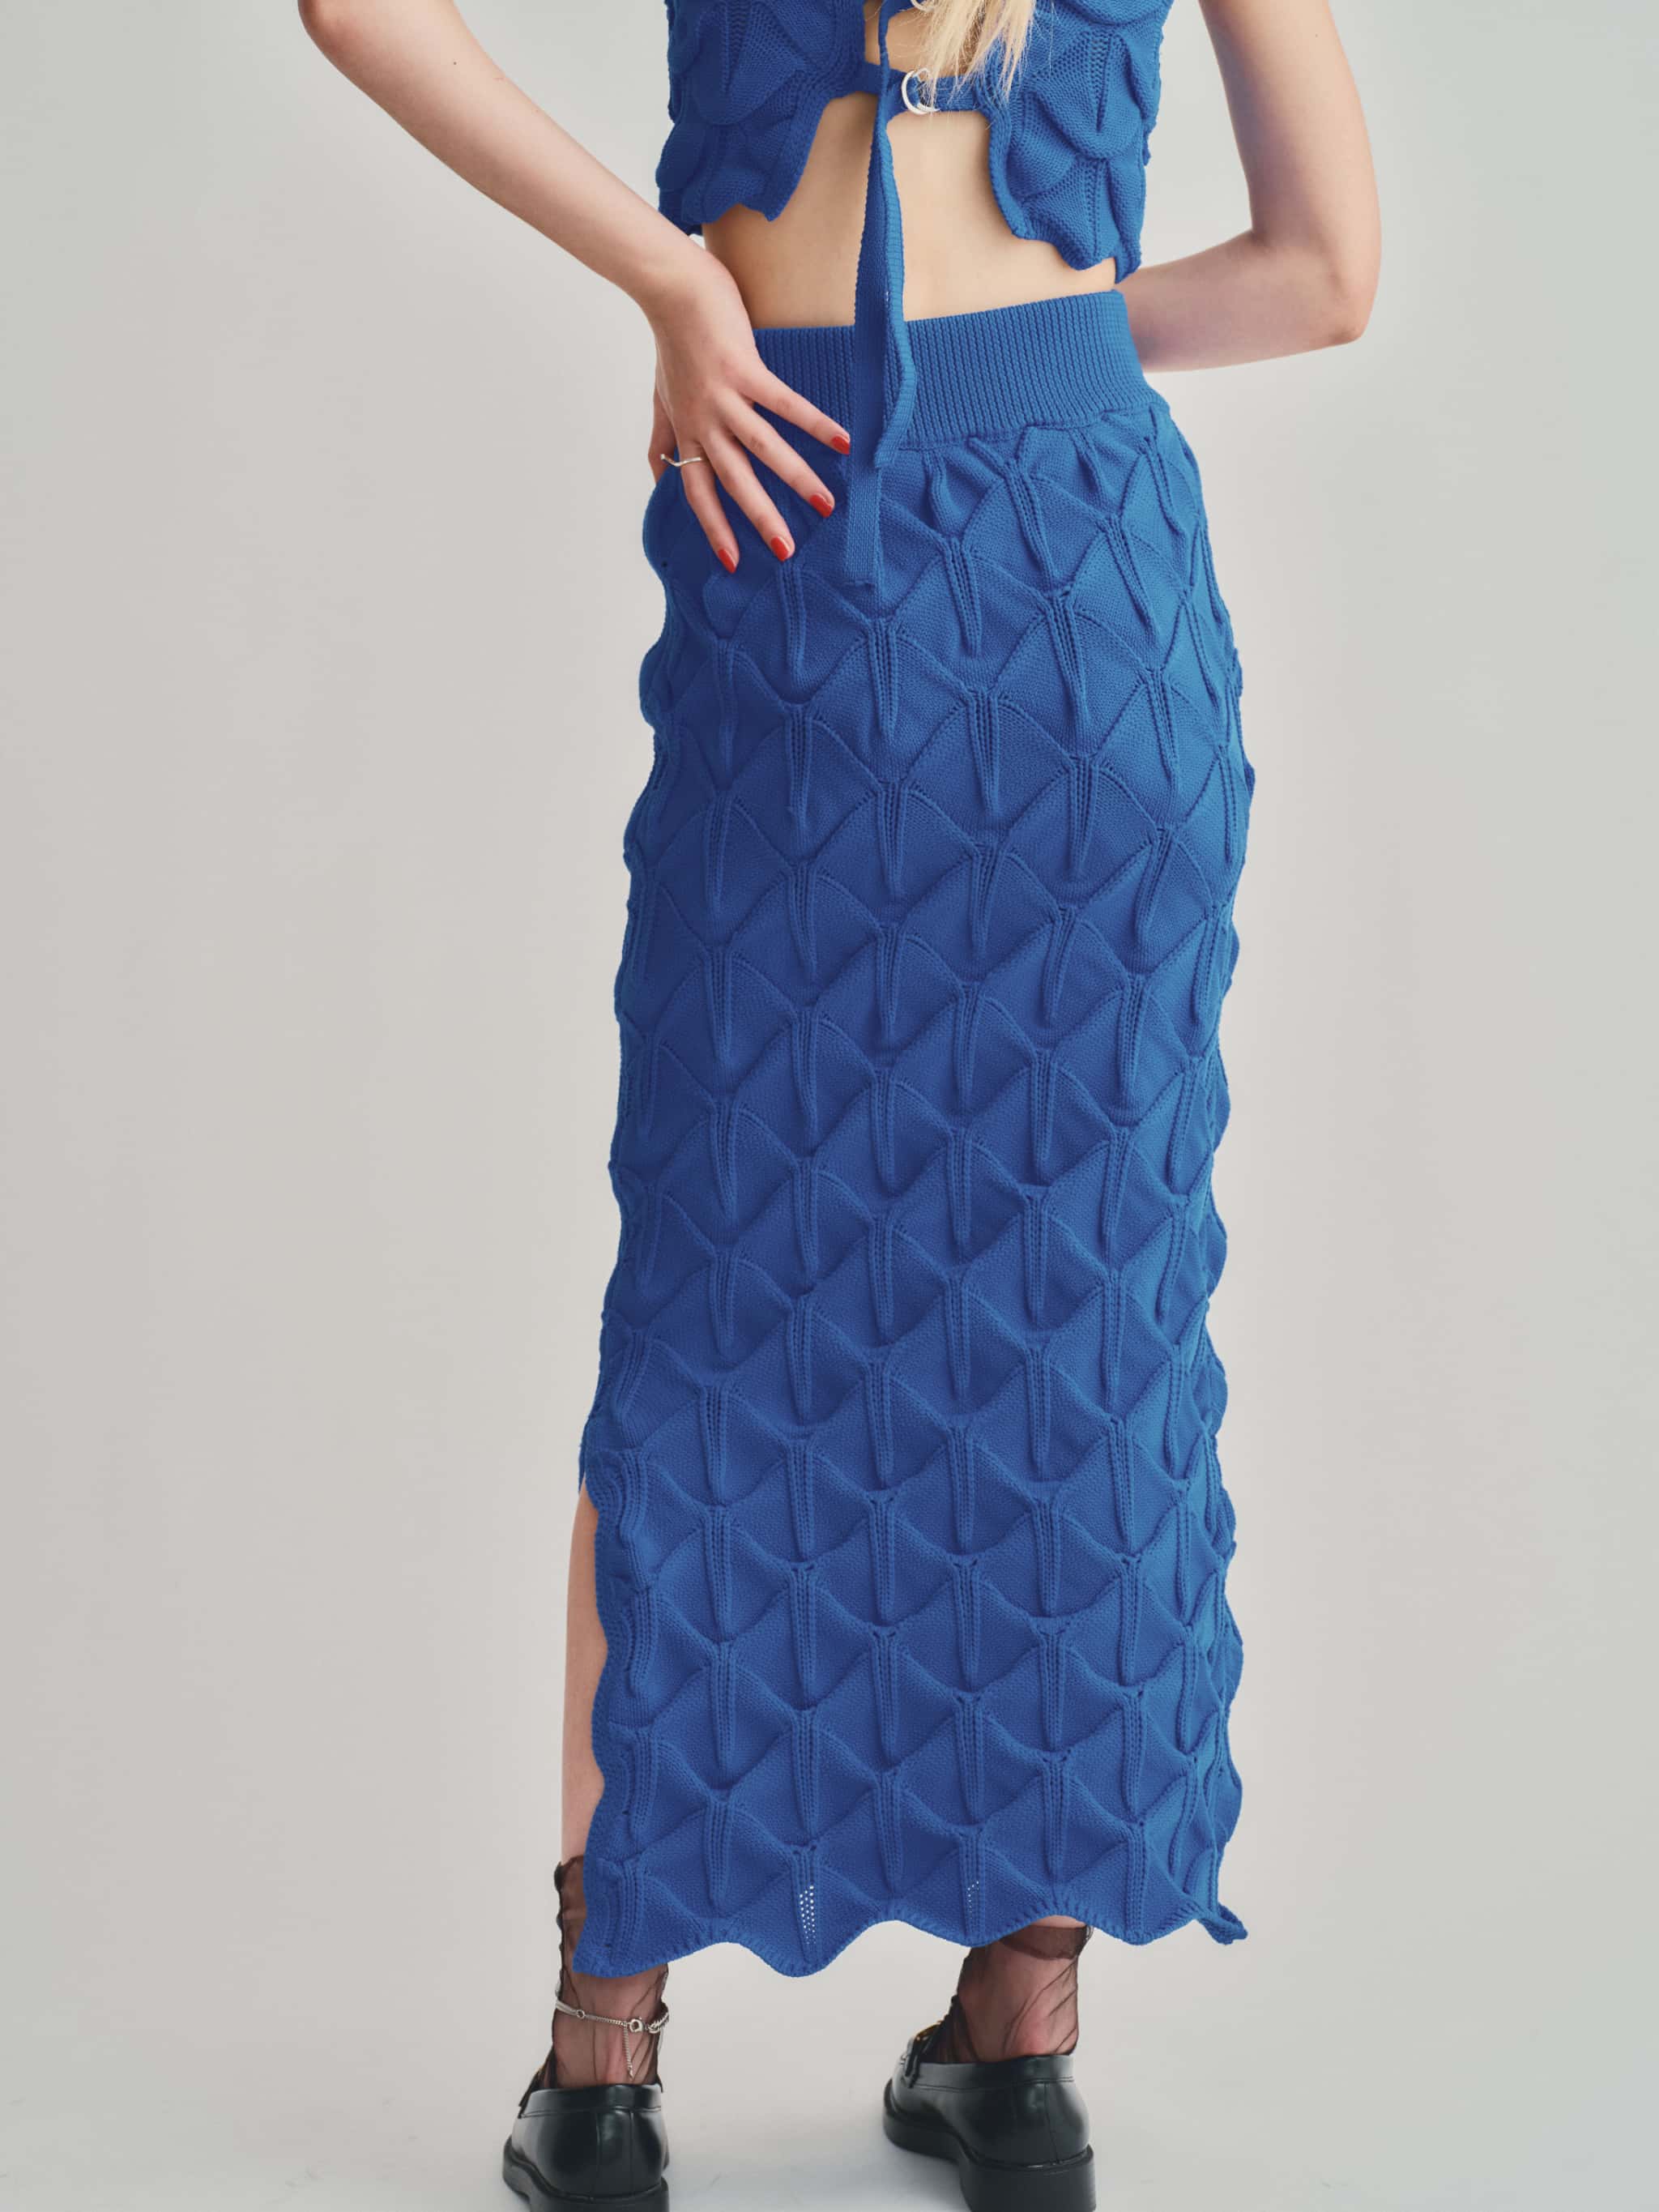 WAVE KNIT LONG SKIRT / BLUE – led-tokyo│レッドトーキョー - 23AW